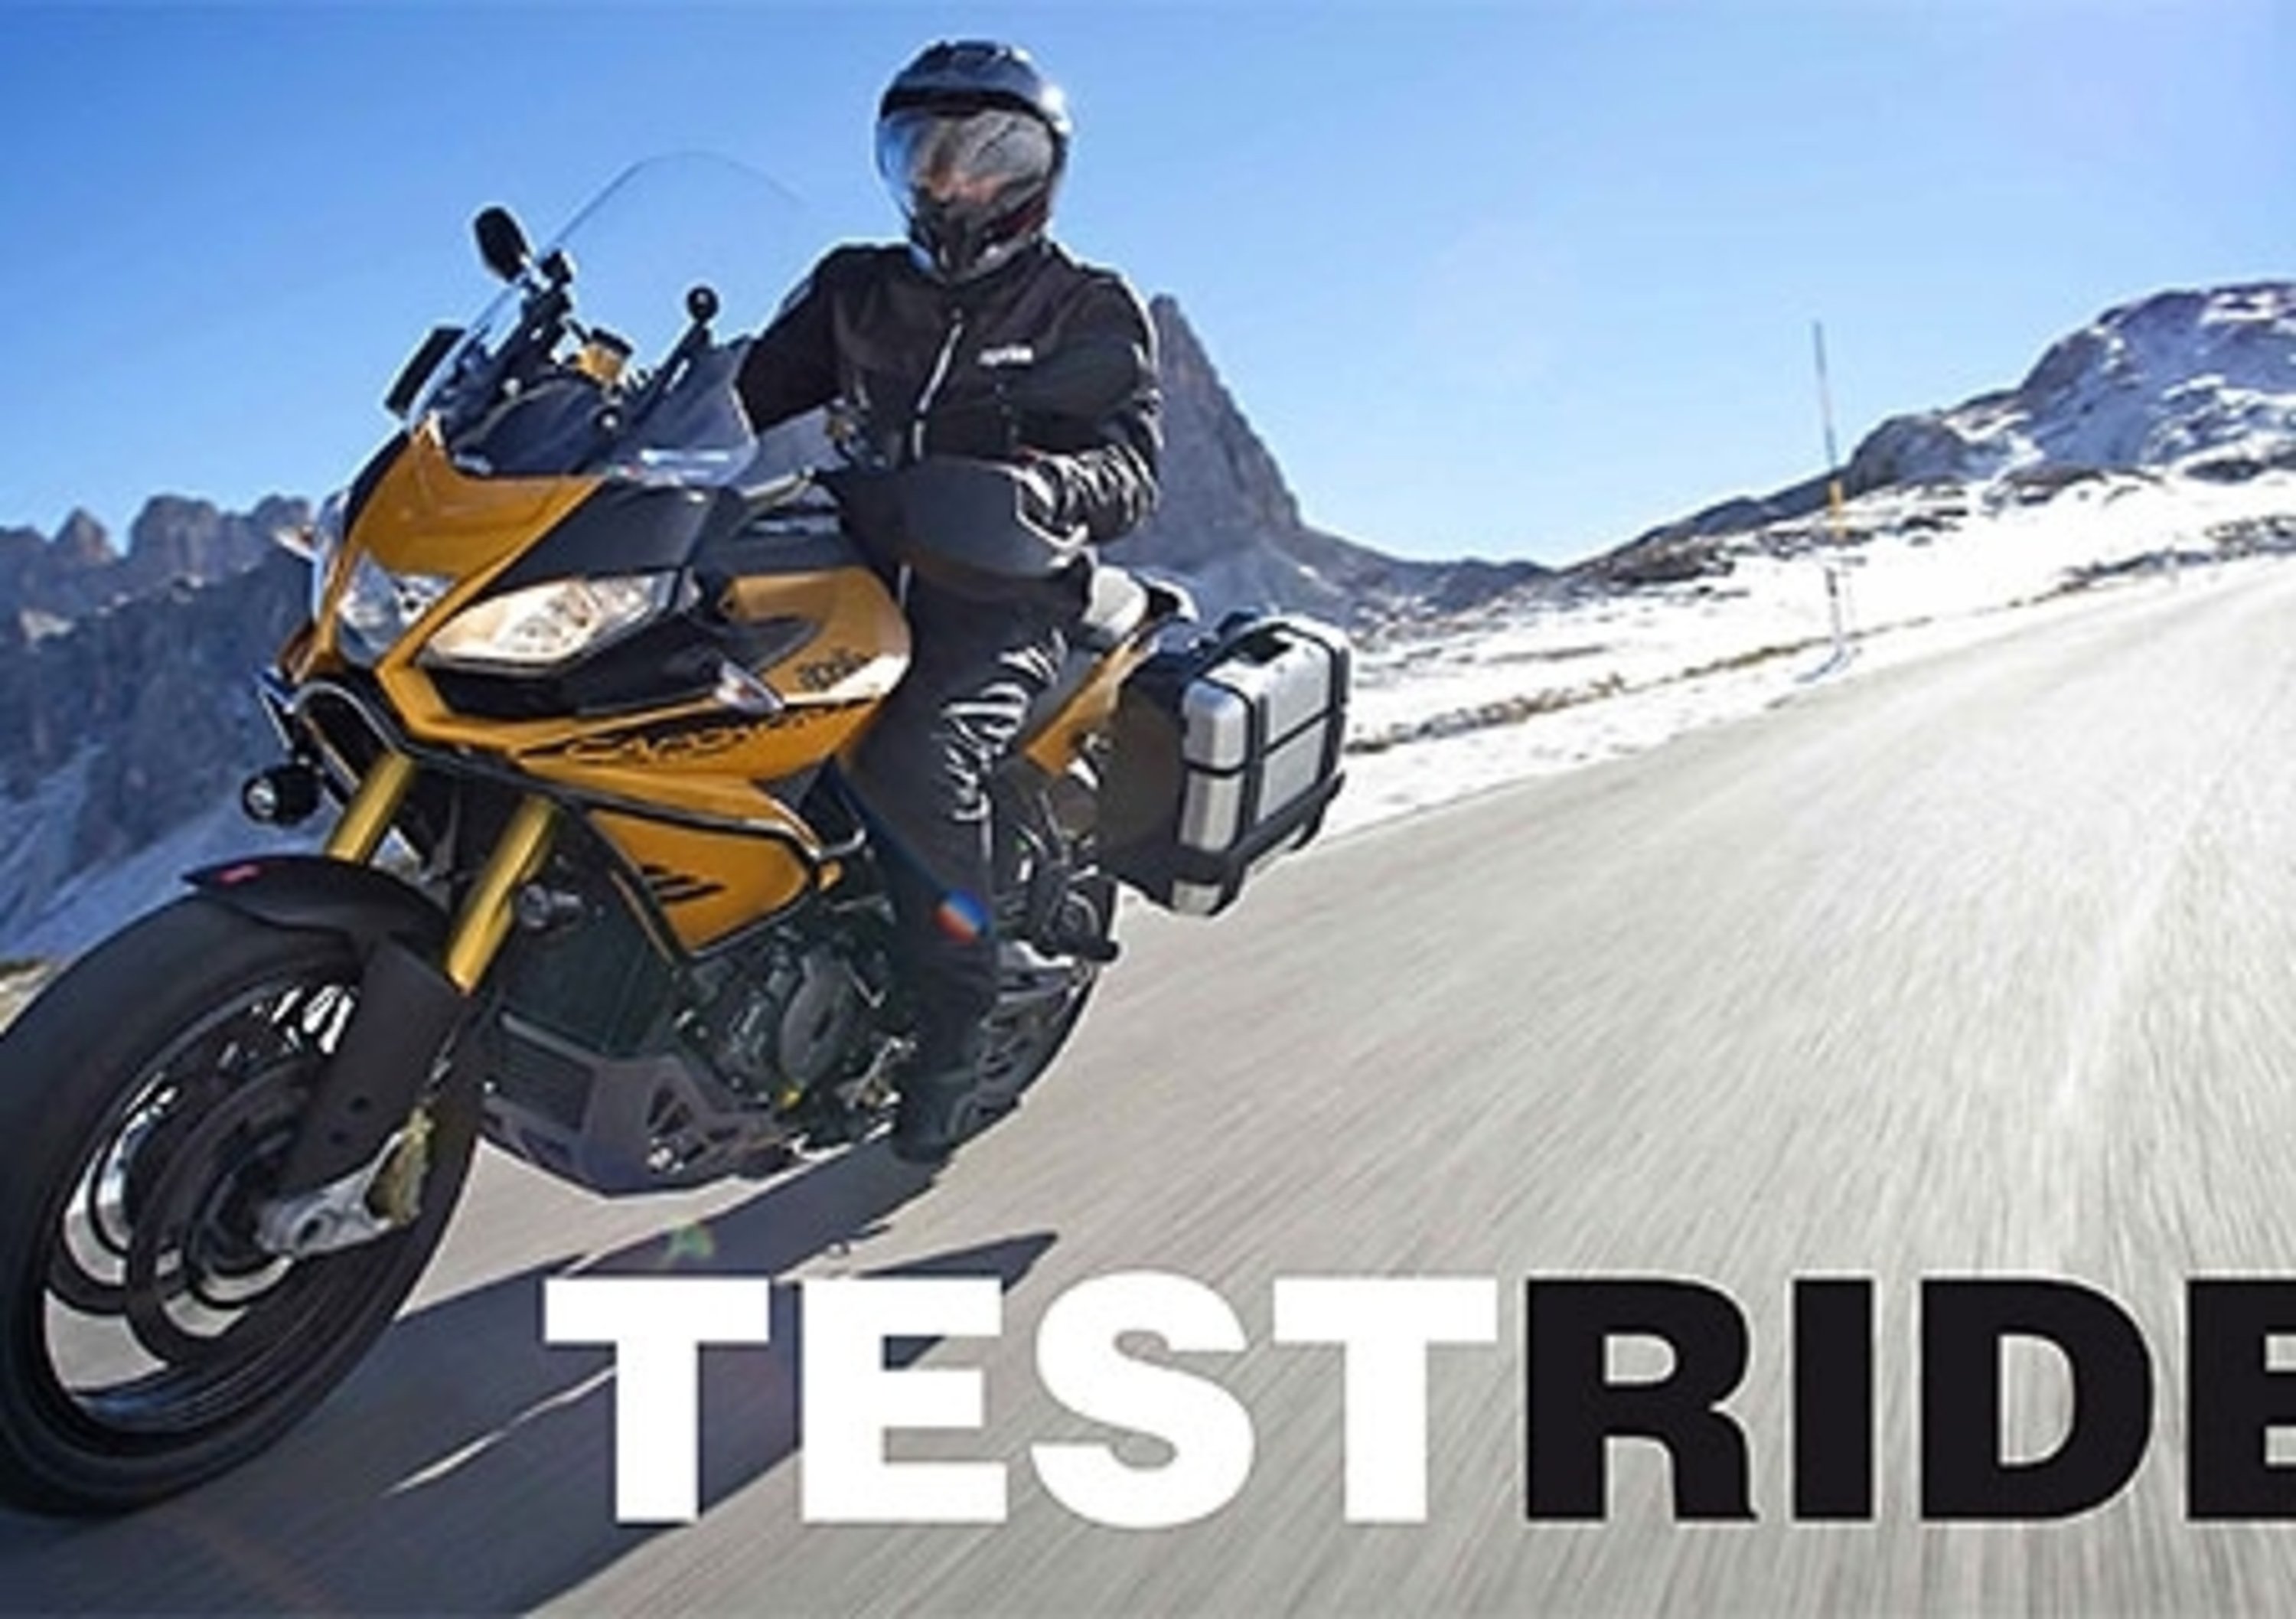 Test ride Caponord 1200 Rally 13-15 marzo